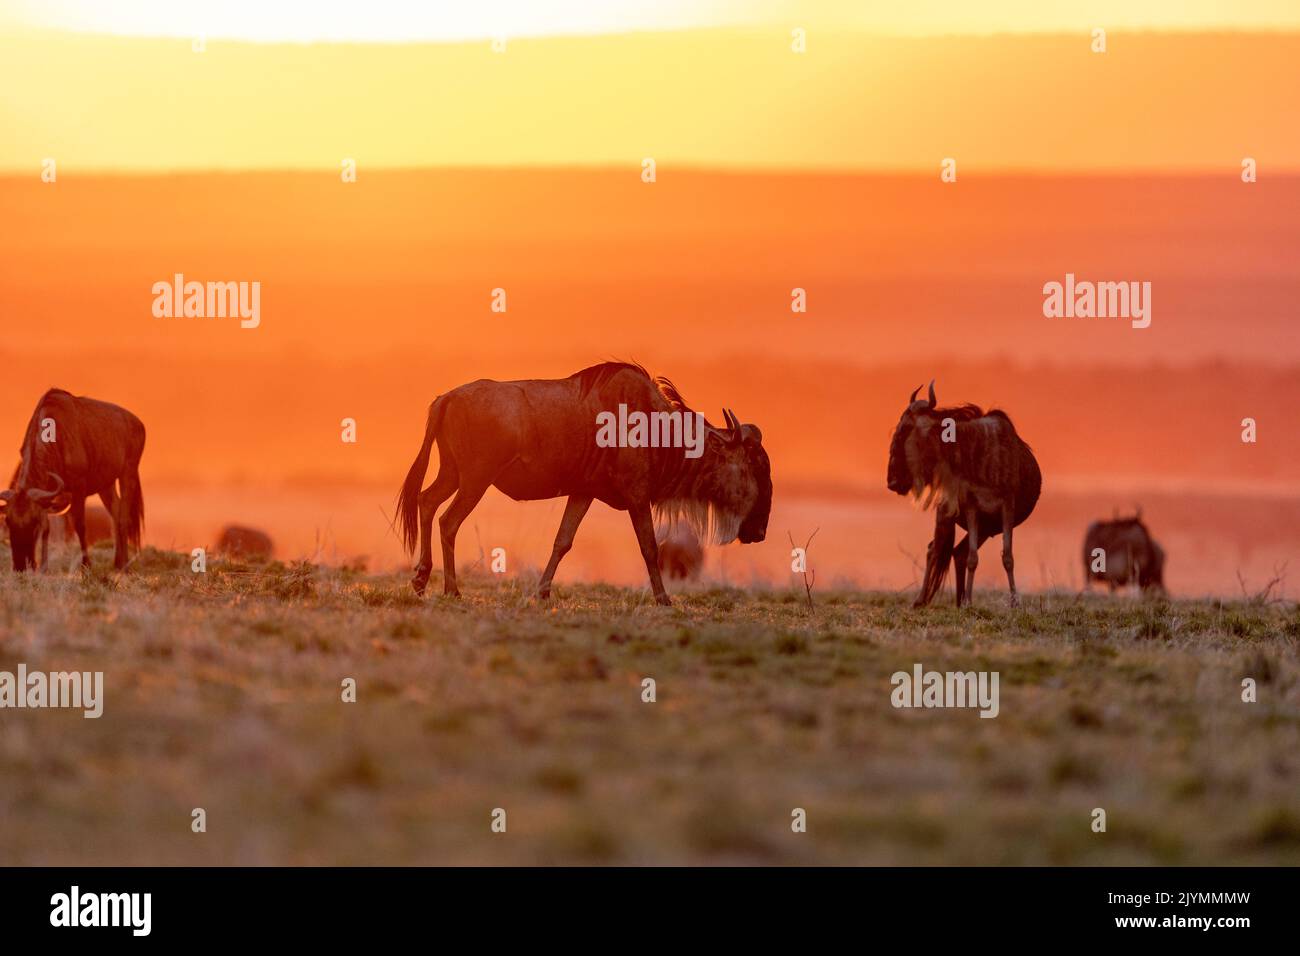 Wildebeest group in the savannah at sunset, Masai Mara National Reserve, National Park, Kenya, East Africa, Africa Stock Photo